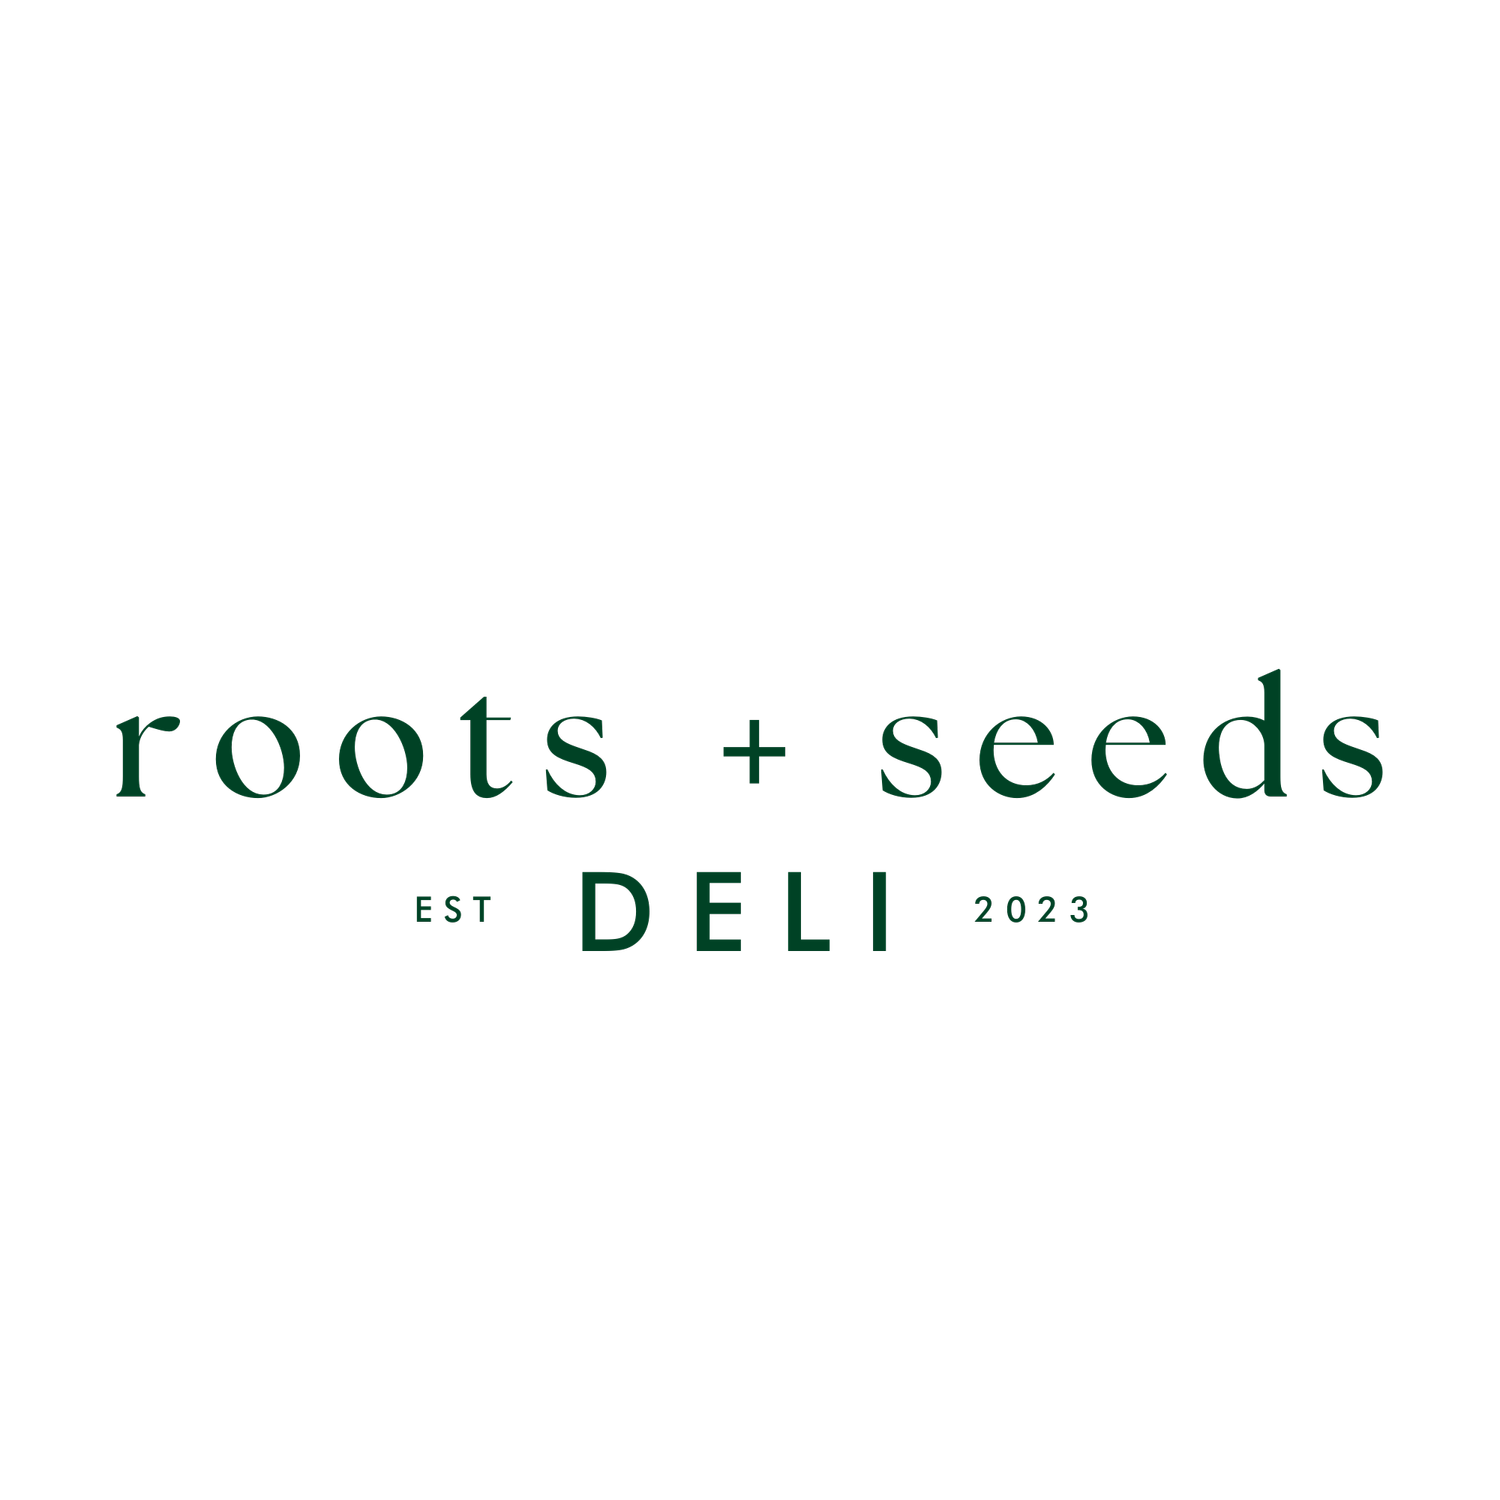 Roots and Seeds Deli